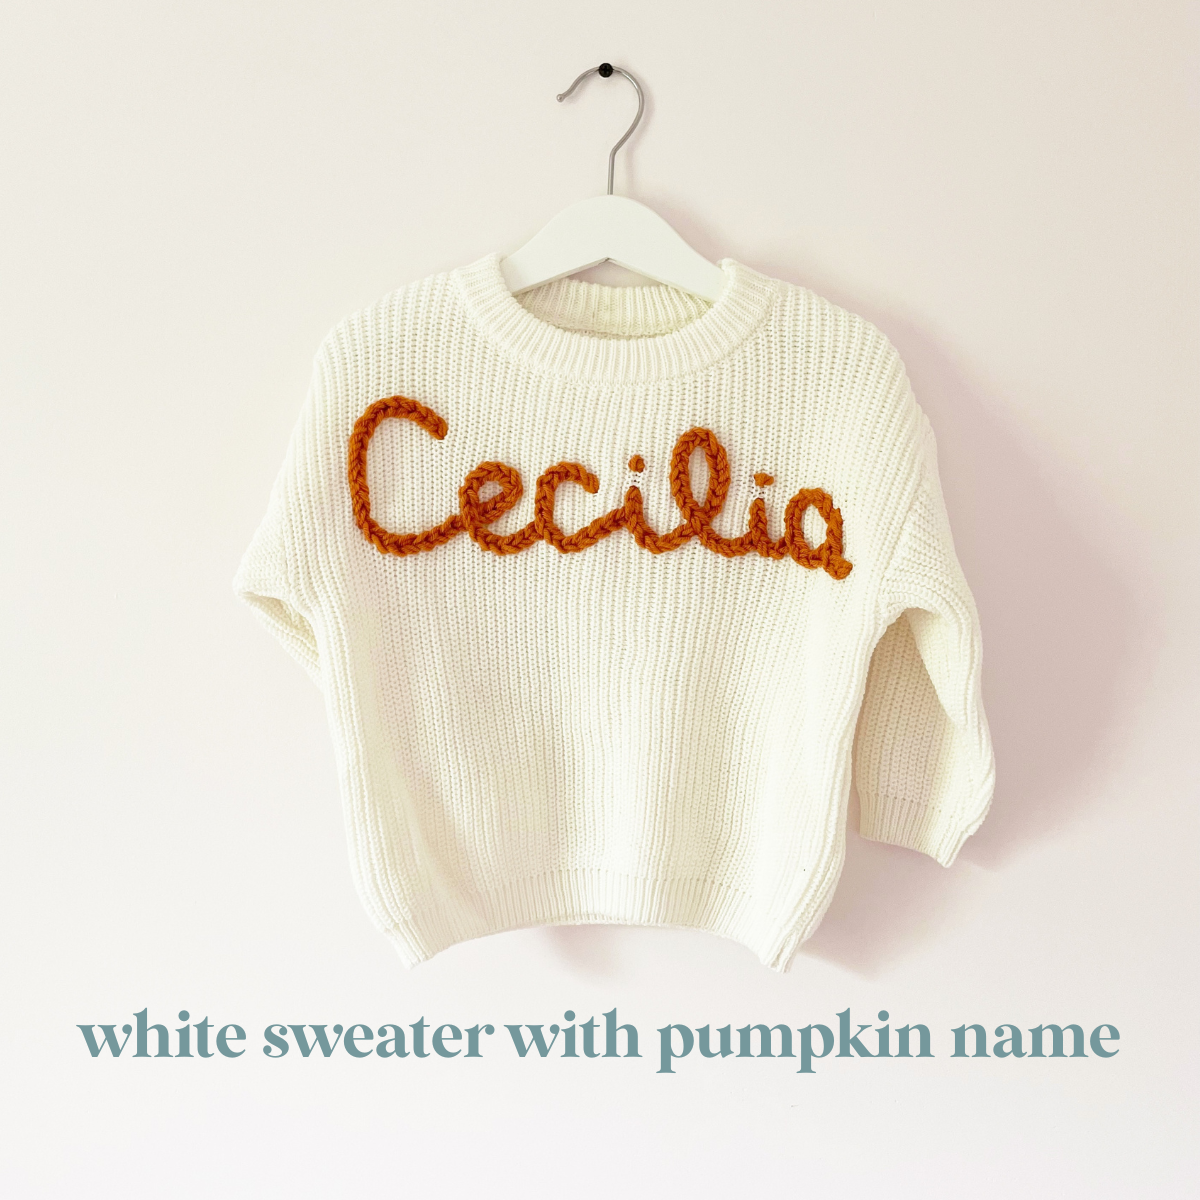 Hand-Stitched Name Sweater